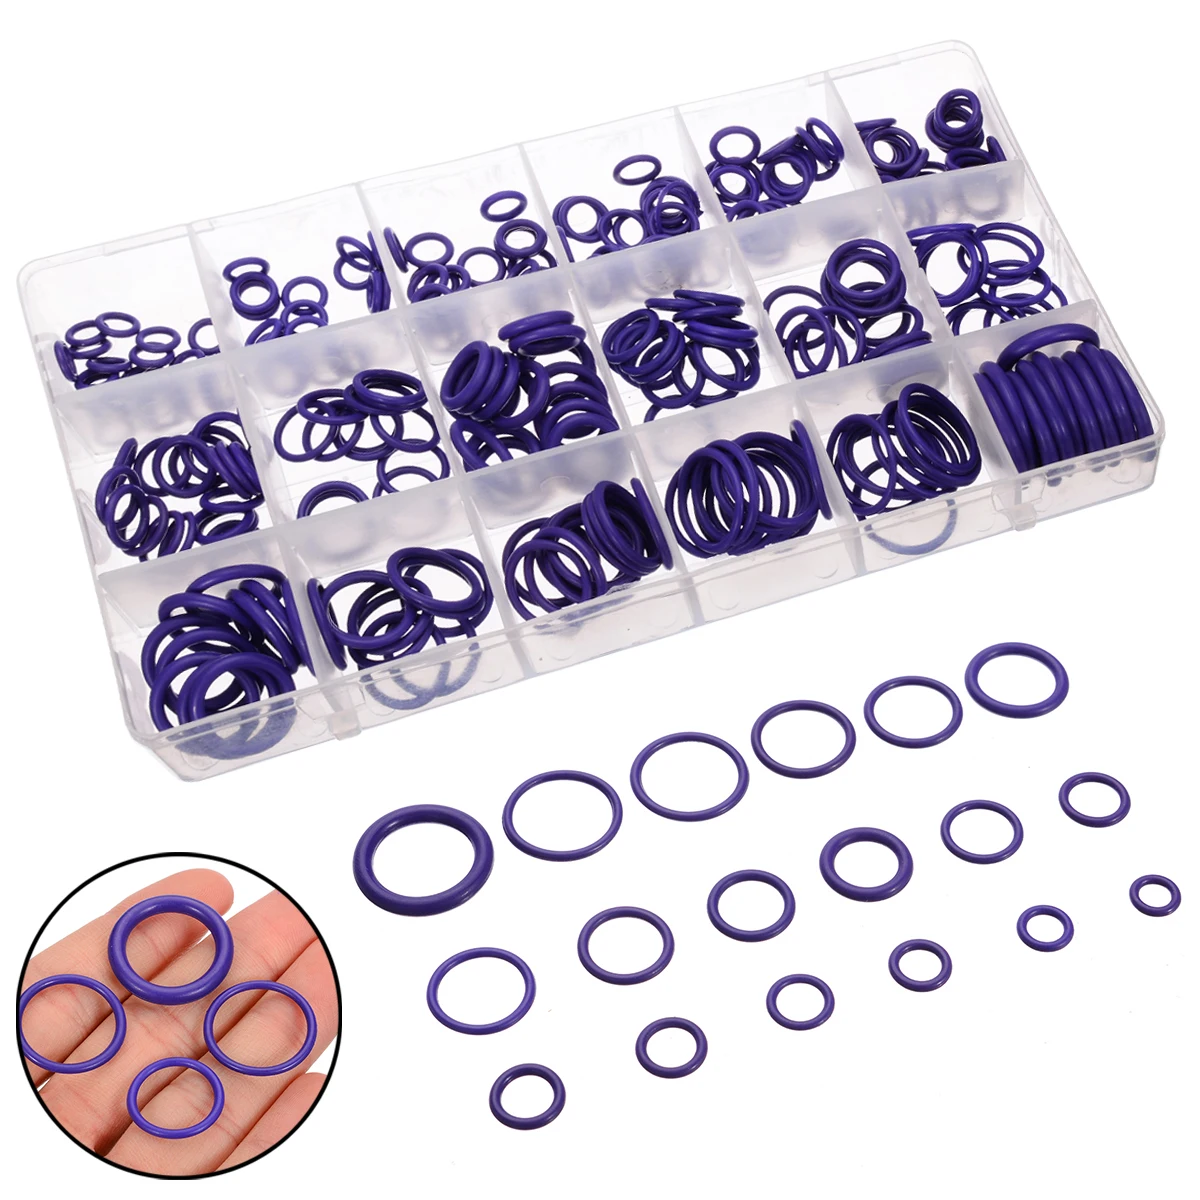 

270pcs R134a Ring Assortment Purple Rubber O-Ring Seals Washers Gasket For Car Auto Air Conditioning Compressor Pumbs